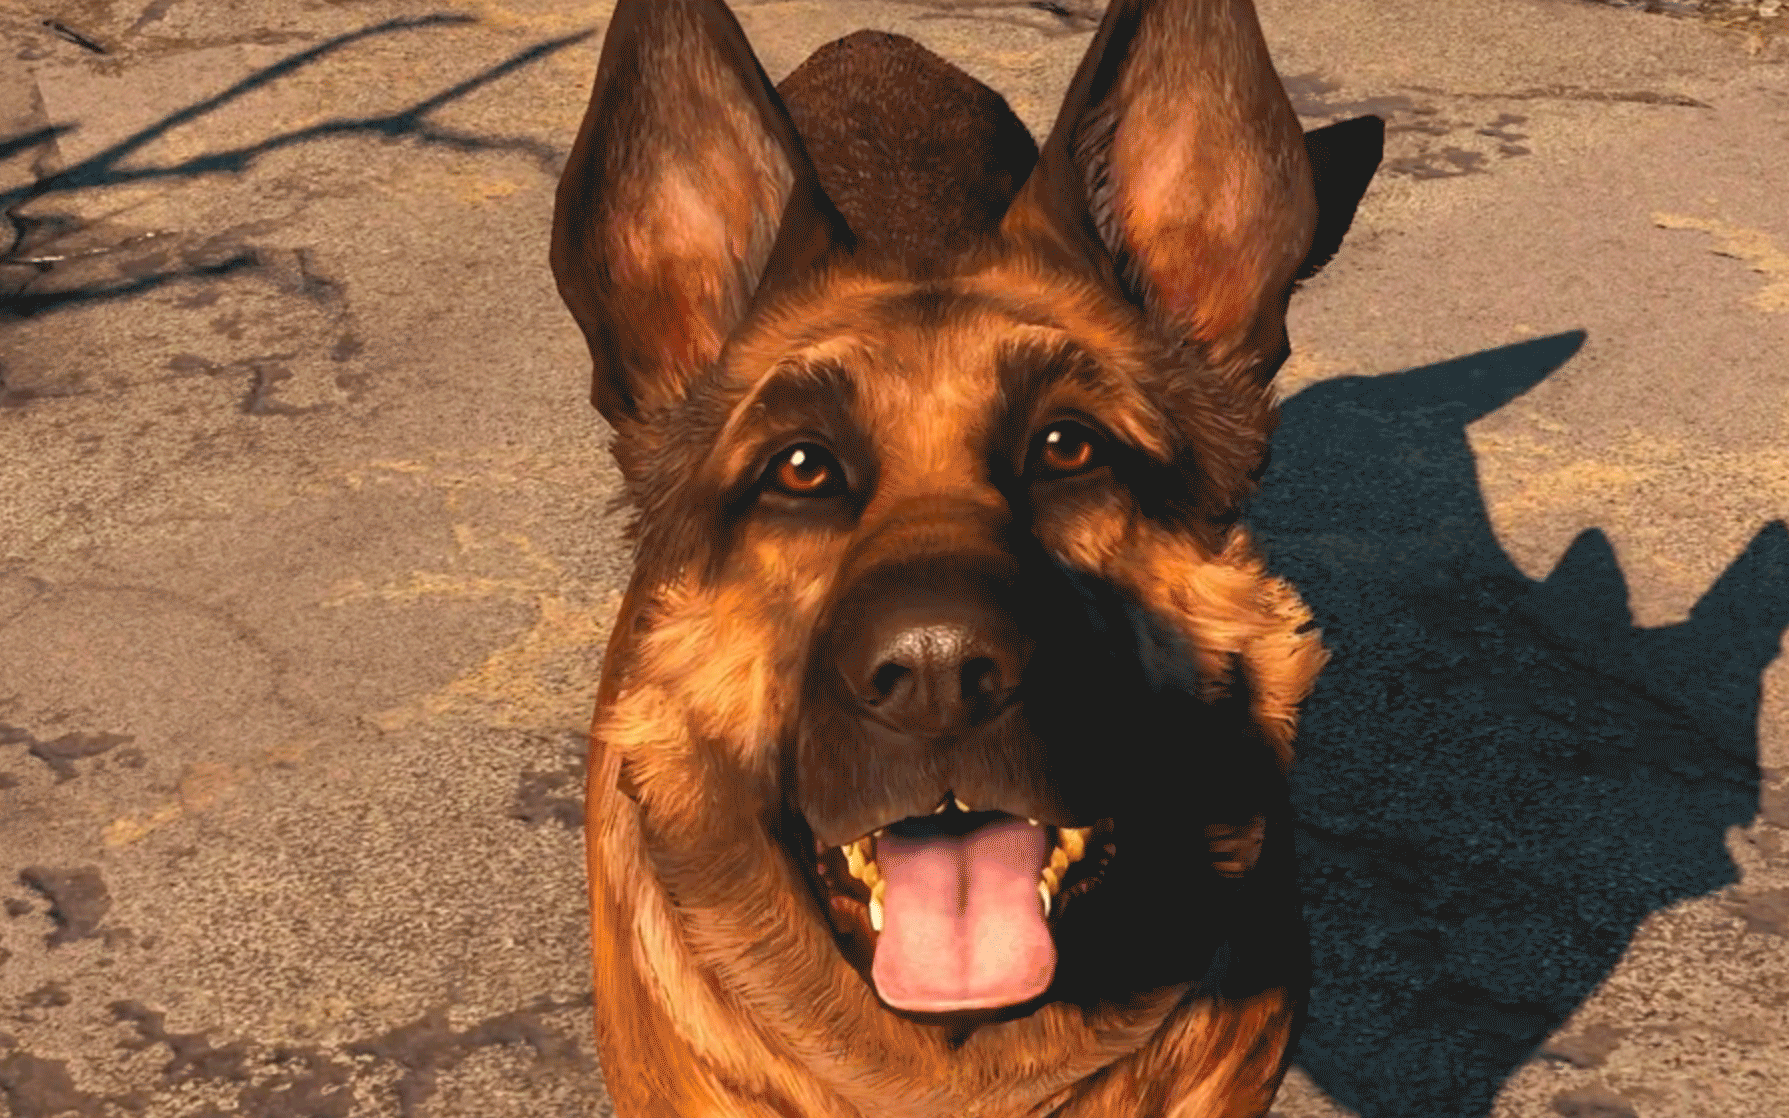 <p>Фото: &copy;&nbsp;<a href="http://fallout.wikia.com/wiki/Dogmeat_(Fallout_4)?file=Fo4_Dogmeat_E3_Outtro.png" target="_blank">fallout.wikia.com</a></p>